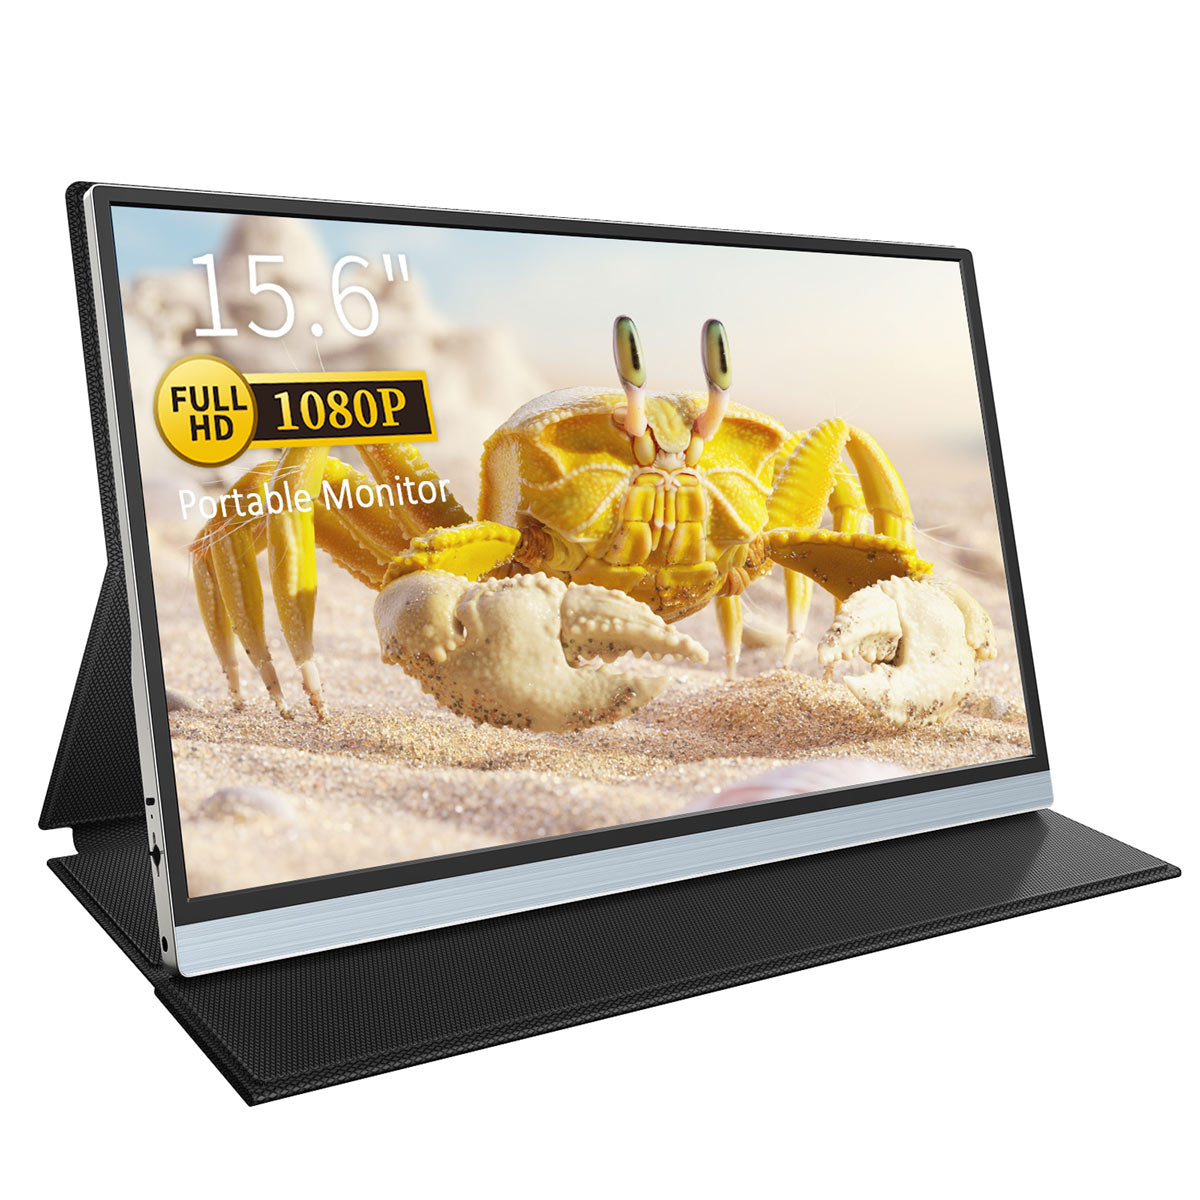 Corprit D158 Upgraded 15.6" 1080P FHD USB Portable Monitor for Laptop (Out Of Stock In The US)